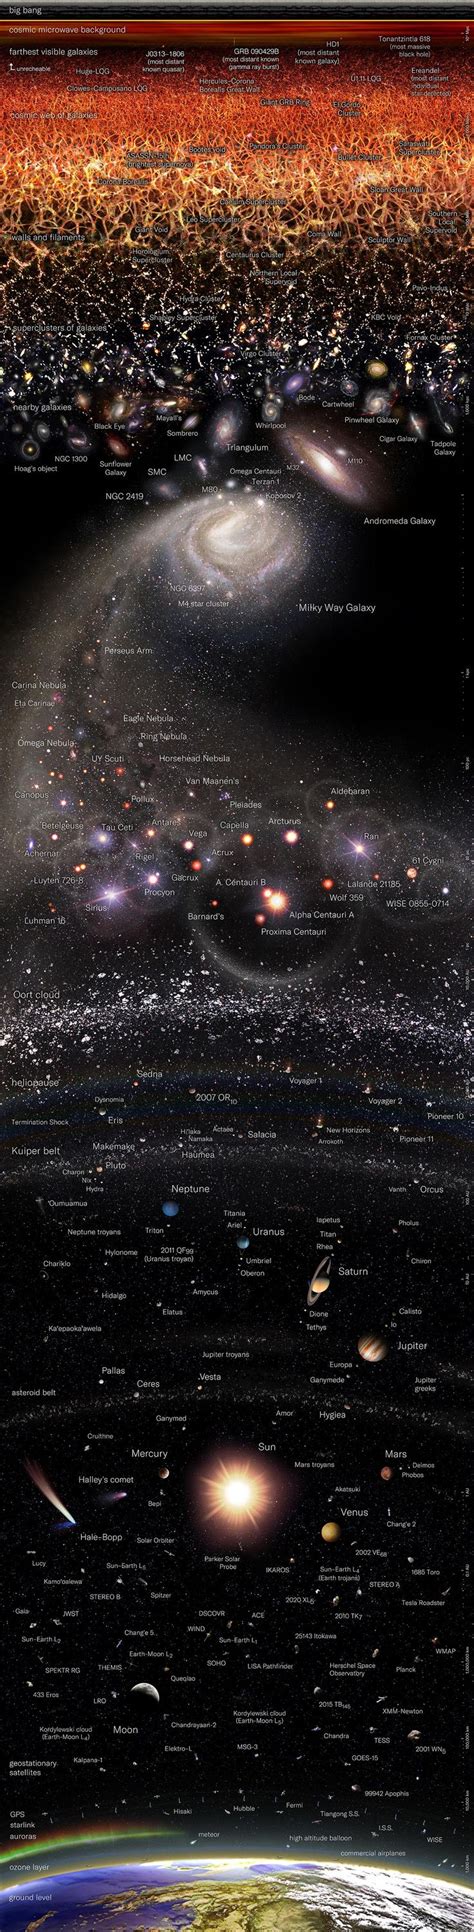 An Artists Rendering Of The Solar System With Its Many Different